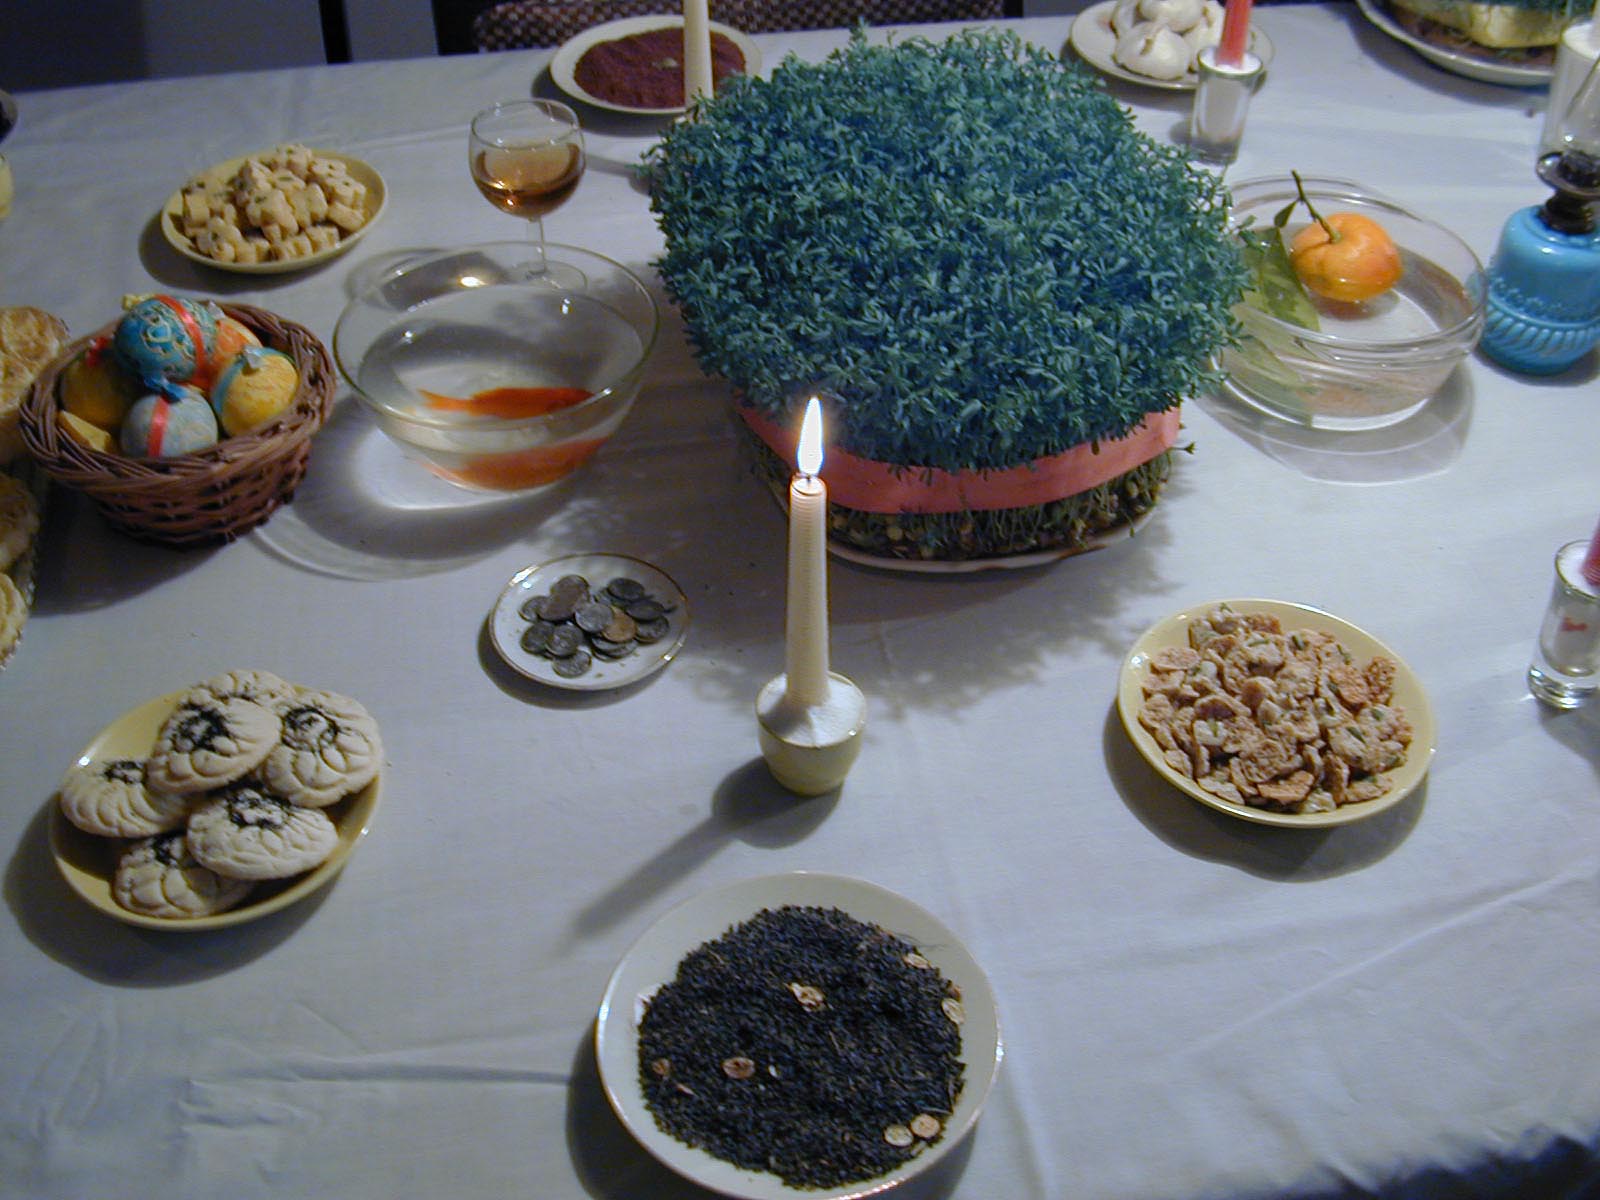 A Haft-Sin table furnished with the traditional seven symbolic items, each beginning with the Persian letter S (Sin), Tehran, Iran, 21st March 2002. Haft-Sin is a tradition associated with Iranian new year (Nowruz) celebrations. (Photo by Kaveh Kazemi/Getty Images) (Kaveh Kazemi&mdash;Getty Images)